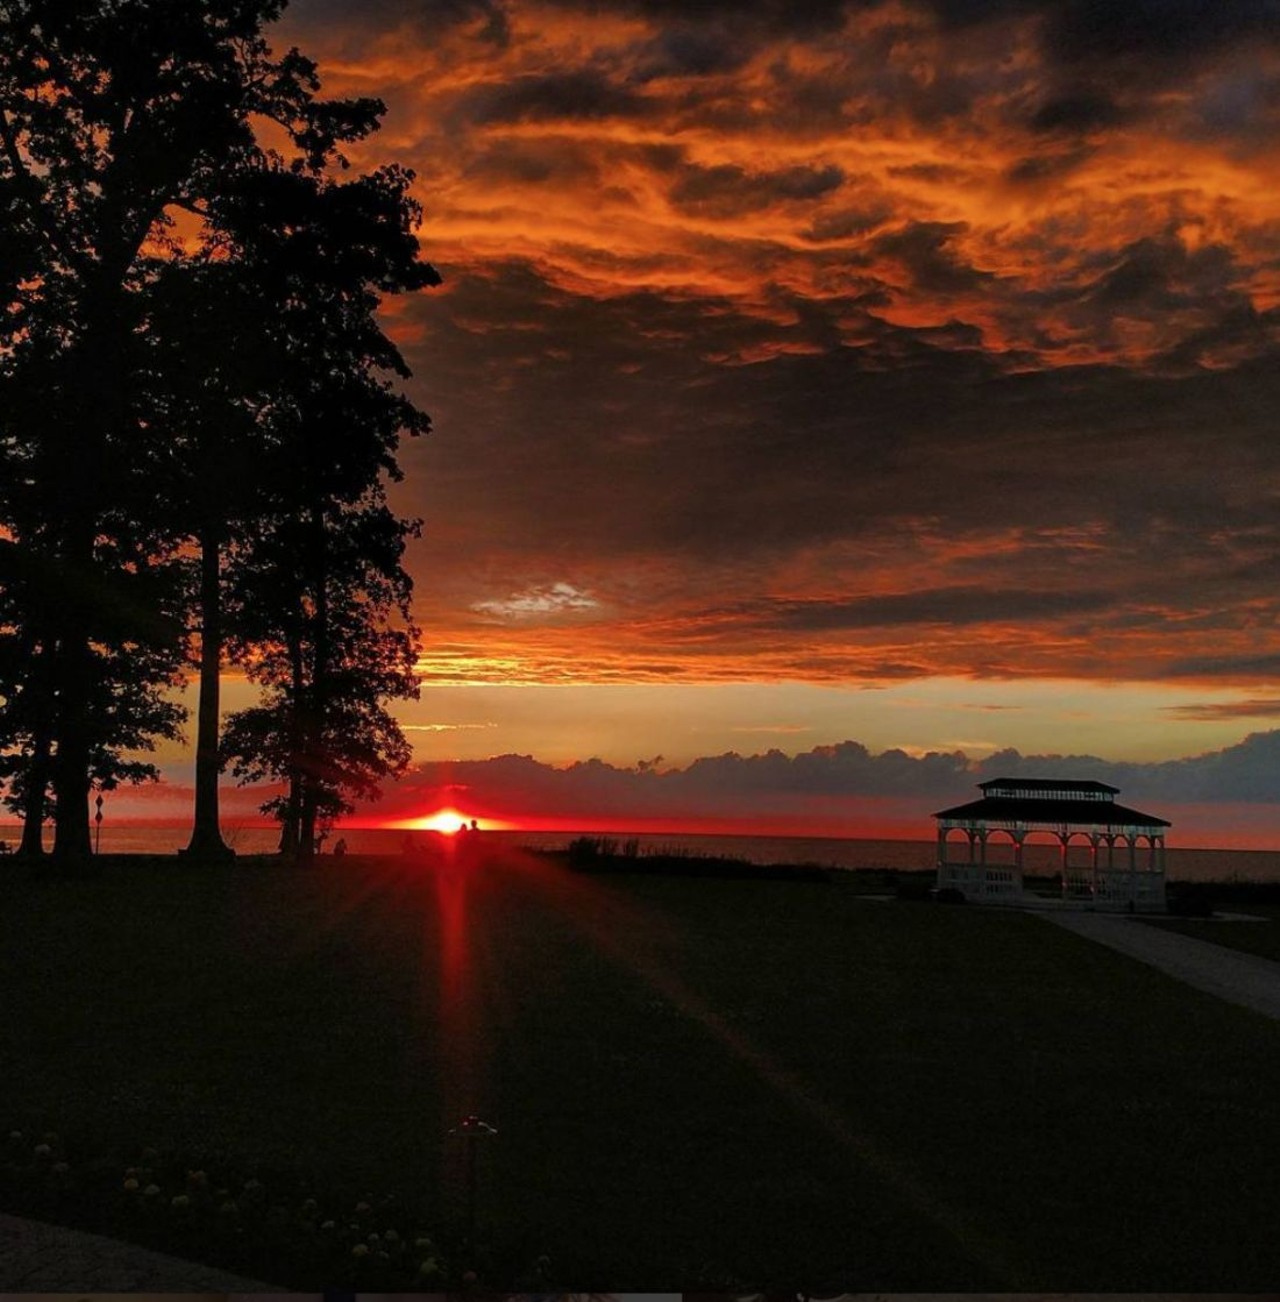 Geneva State Park
4499 Padanarum Rd., Geneva, 440-466-8400
This state park is along the Lake Erie shoreline and offers several gazebos perfect for watching the sun set ... or rise for that matter.
Photo via klawren3/Instagram